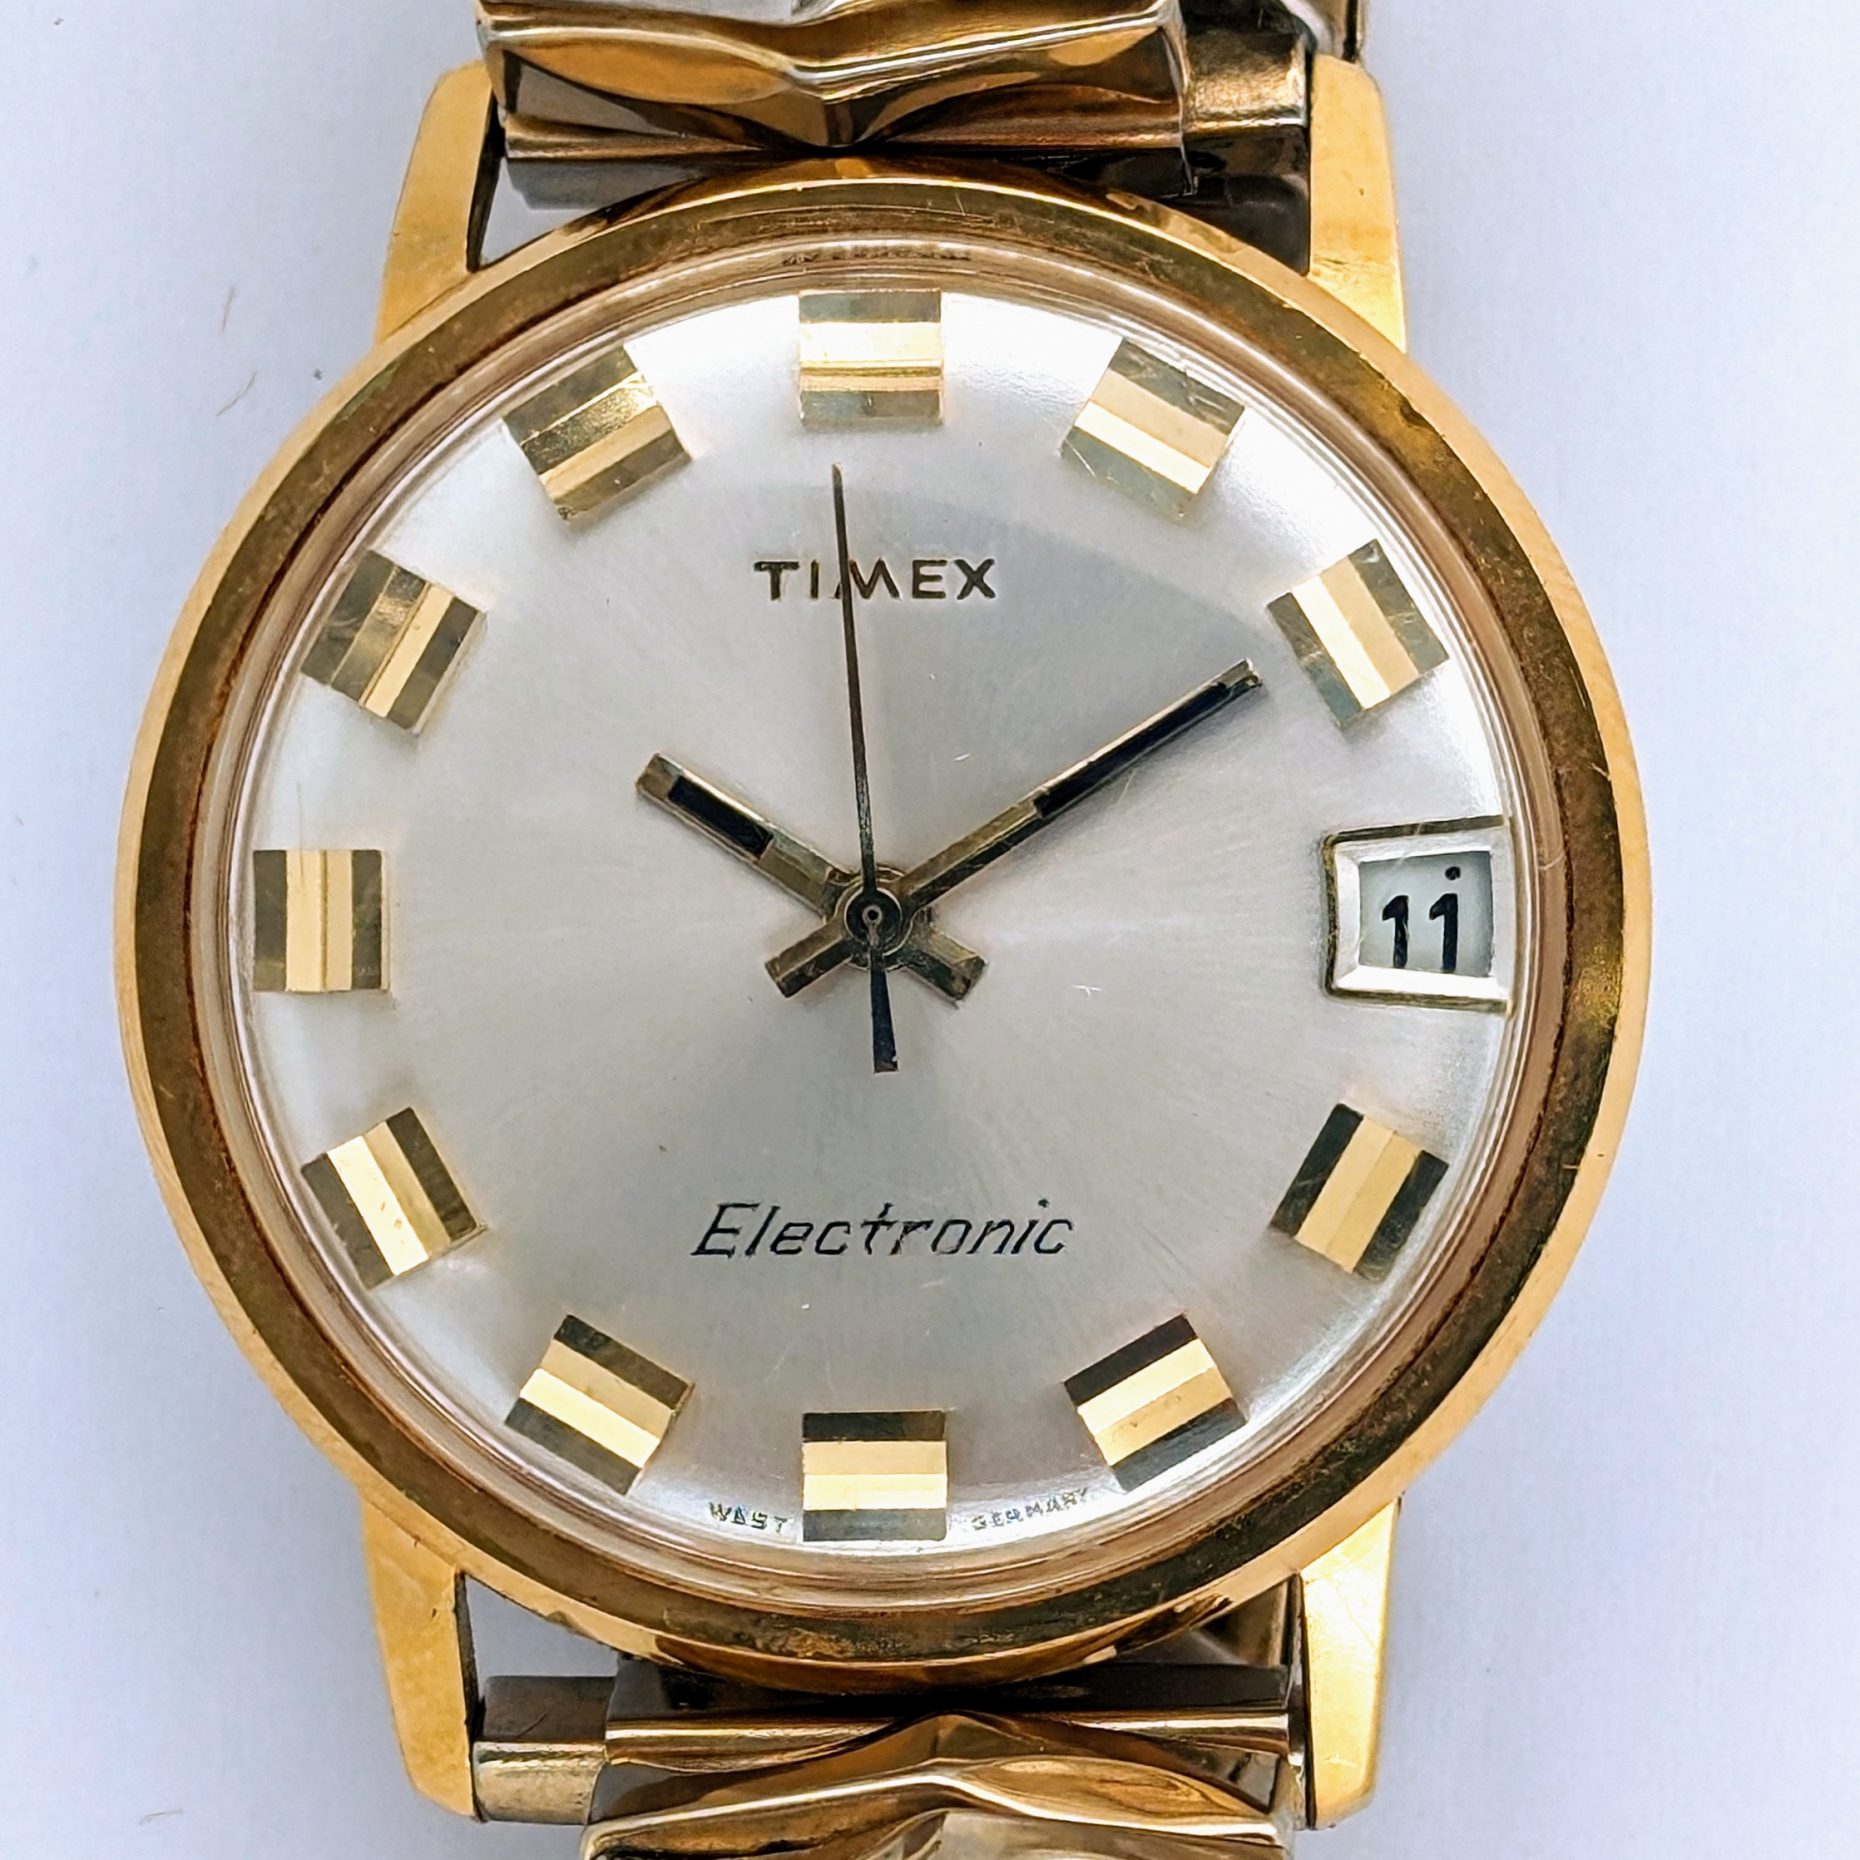 Timex Electronic 1971 Ref. 96560 7871